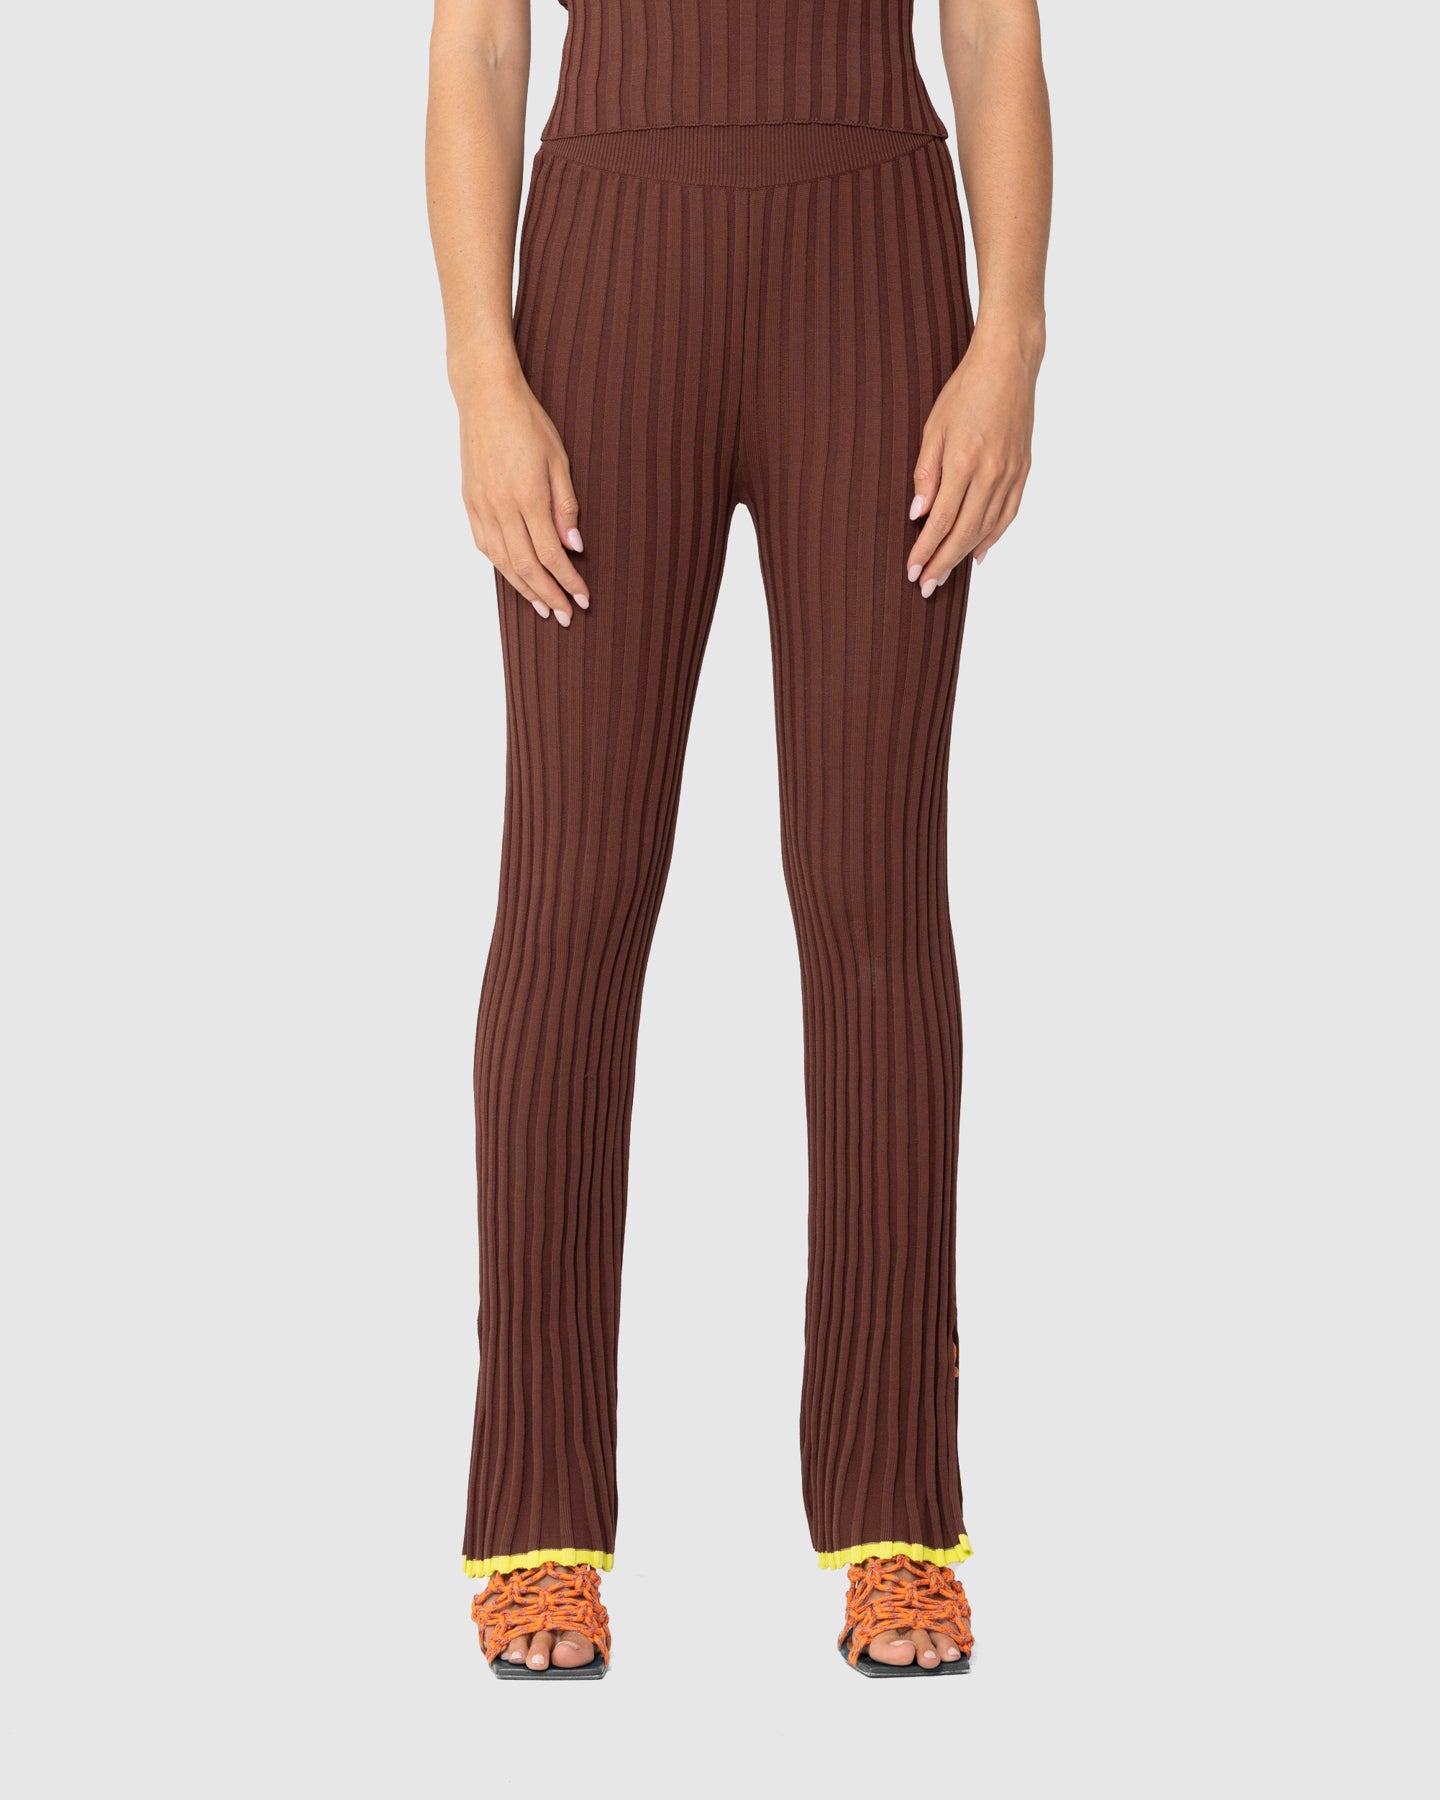 Sol Knit Pant - Chocolate